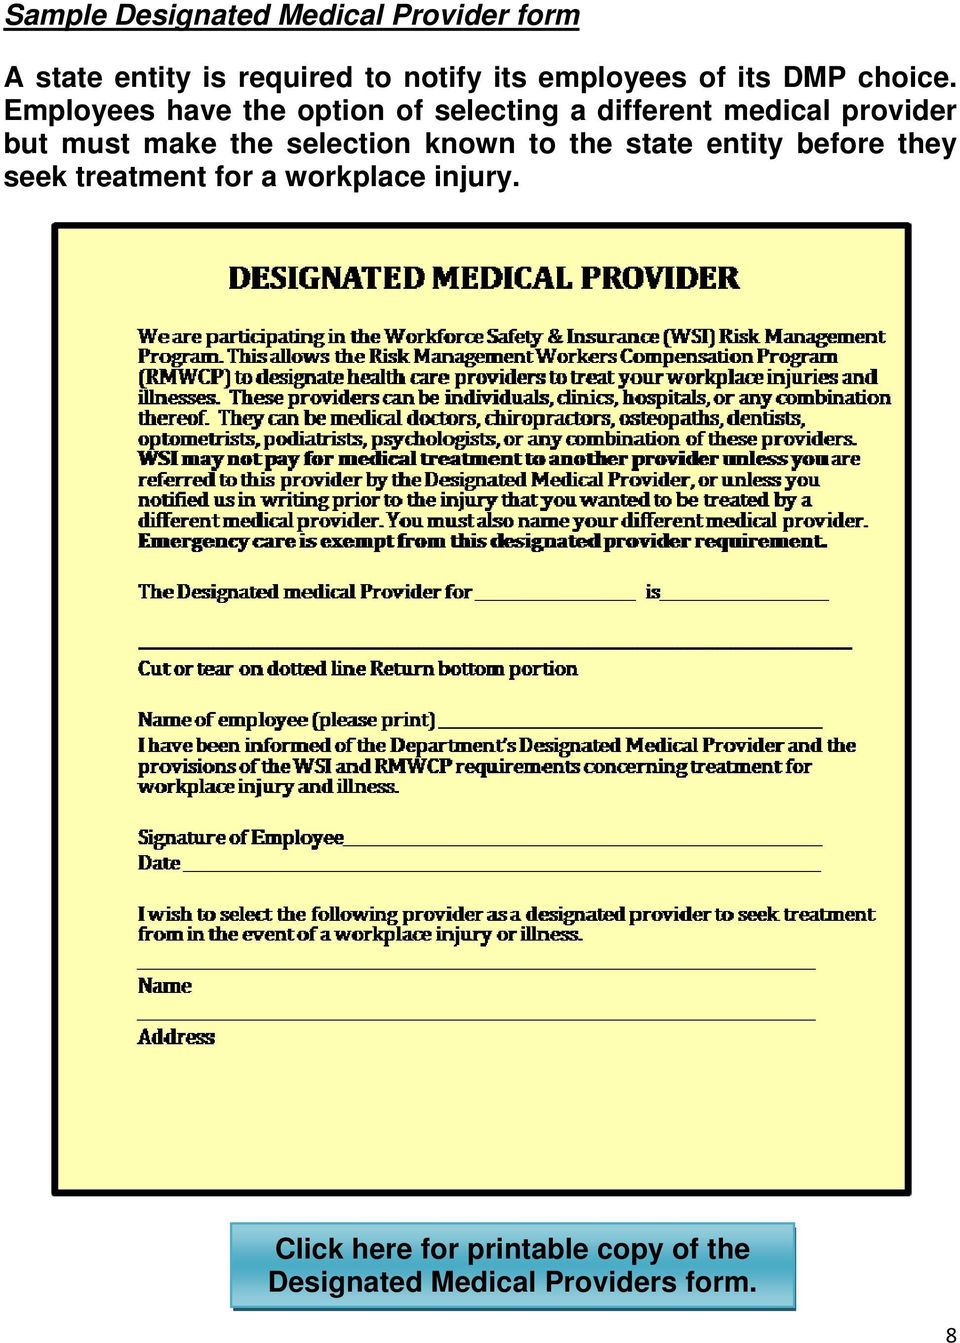 Employees have the option of selecting a different medical provider but must make the